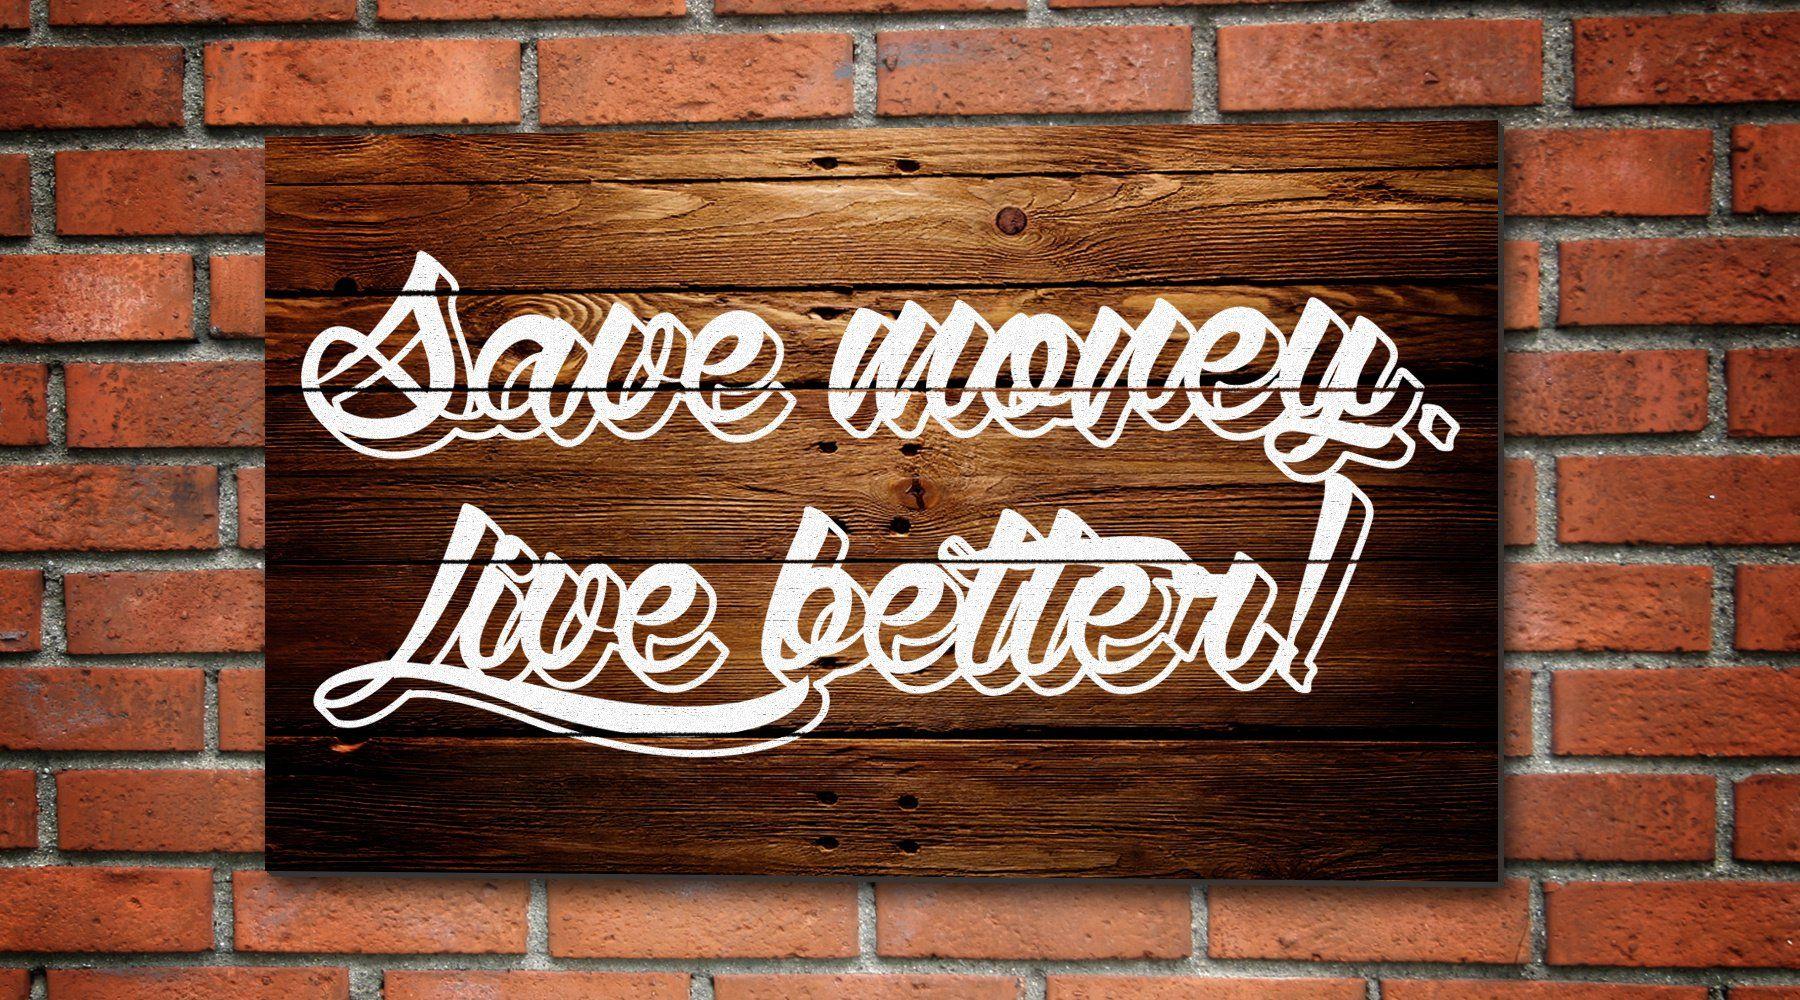 7 great tips to help young people save money